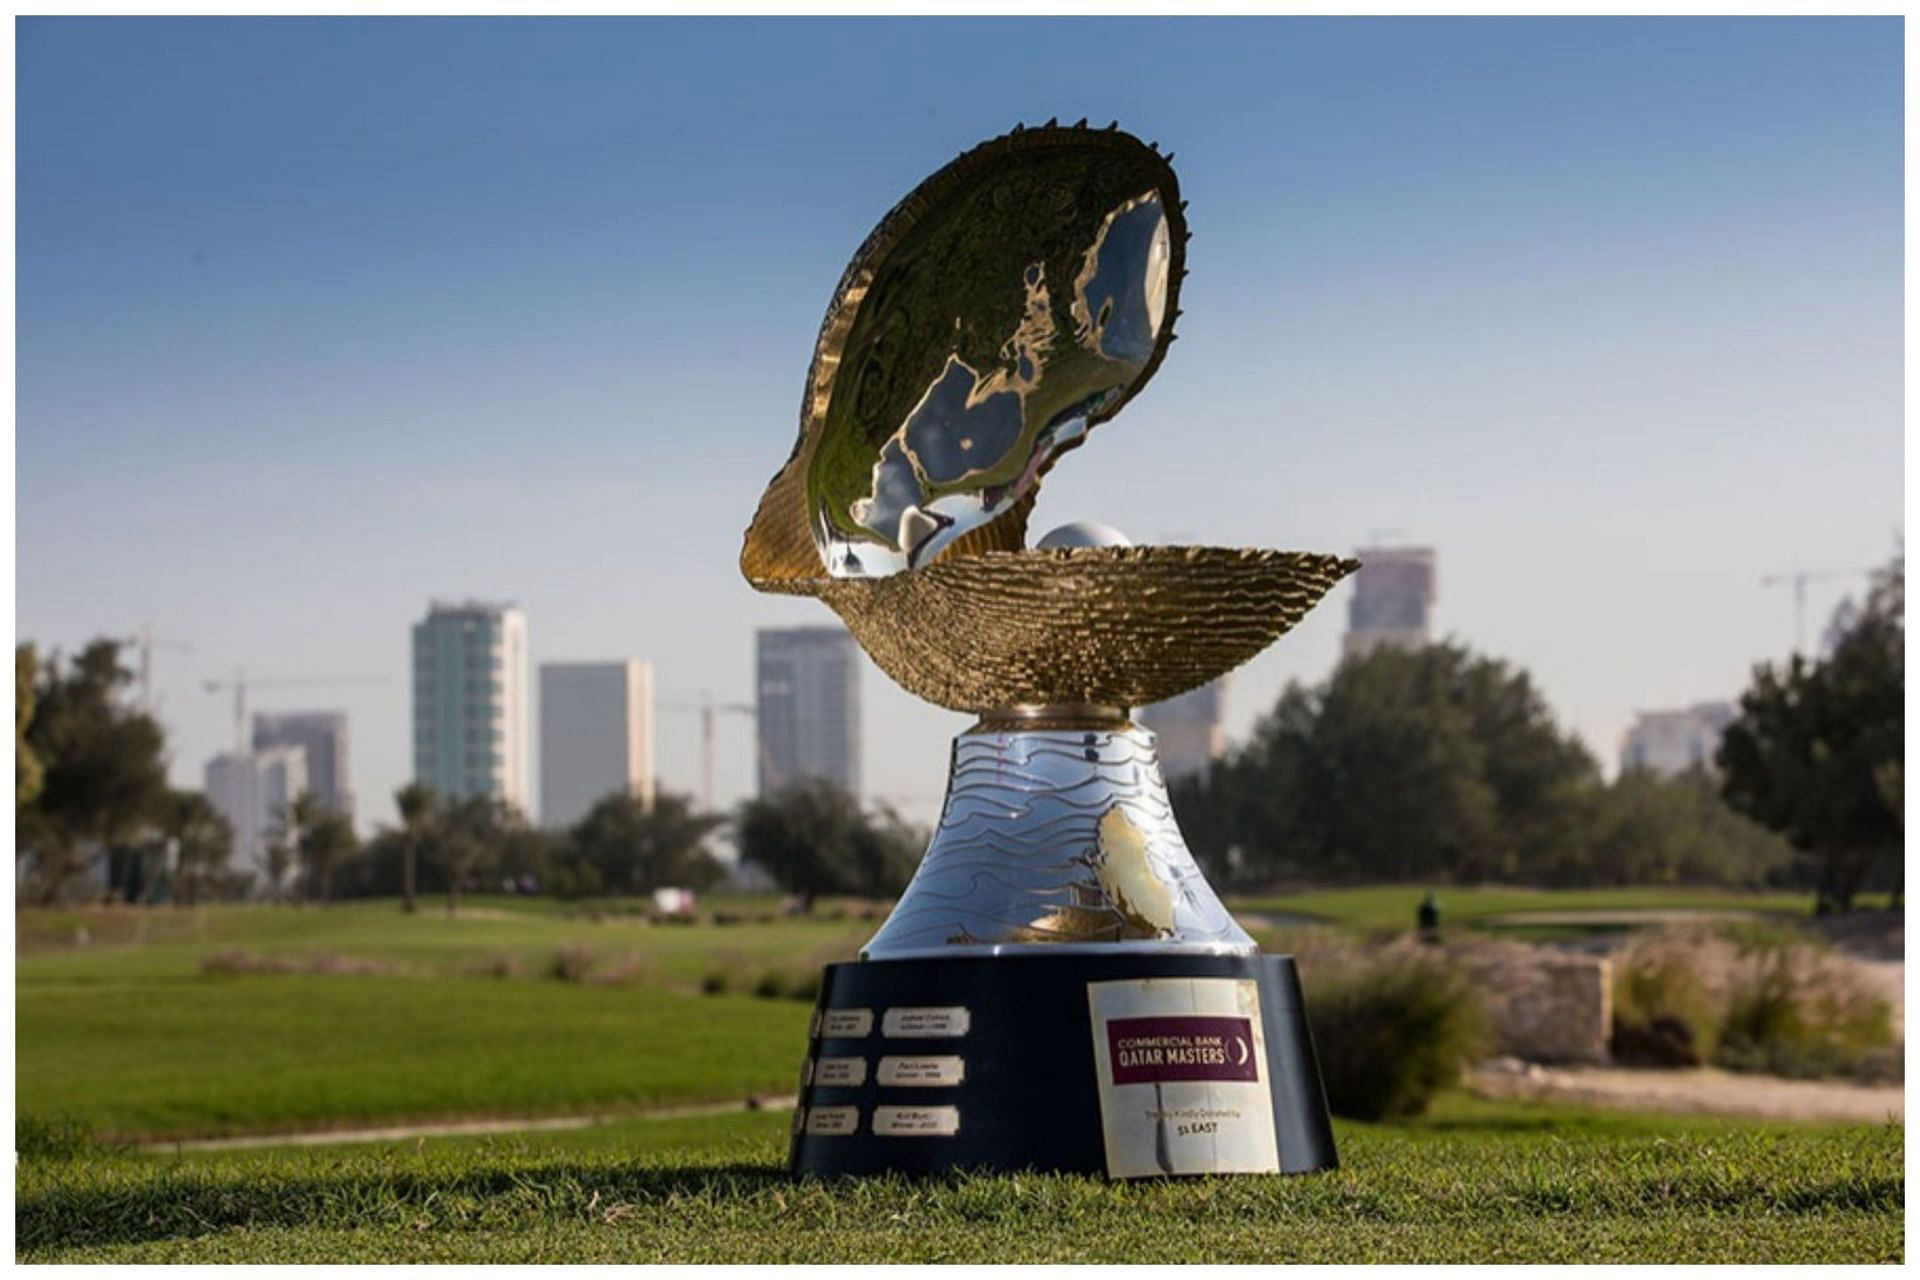 2023 Commercial Bank Qatar Masters Round 1 pairings and tee times explored